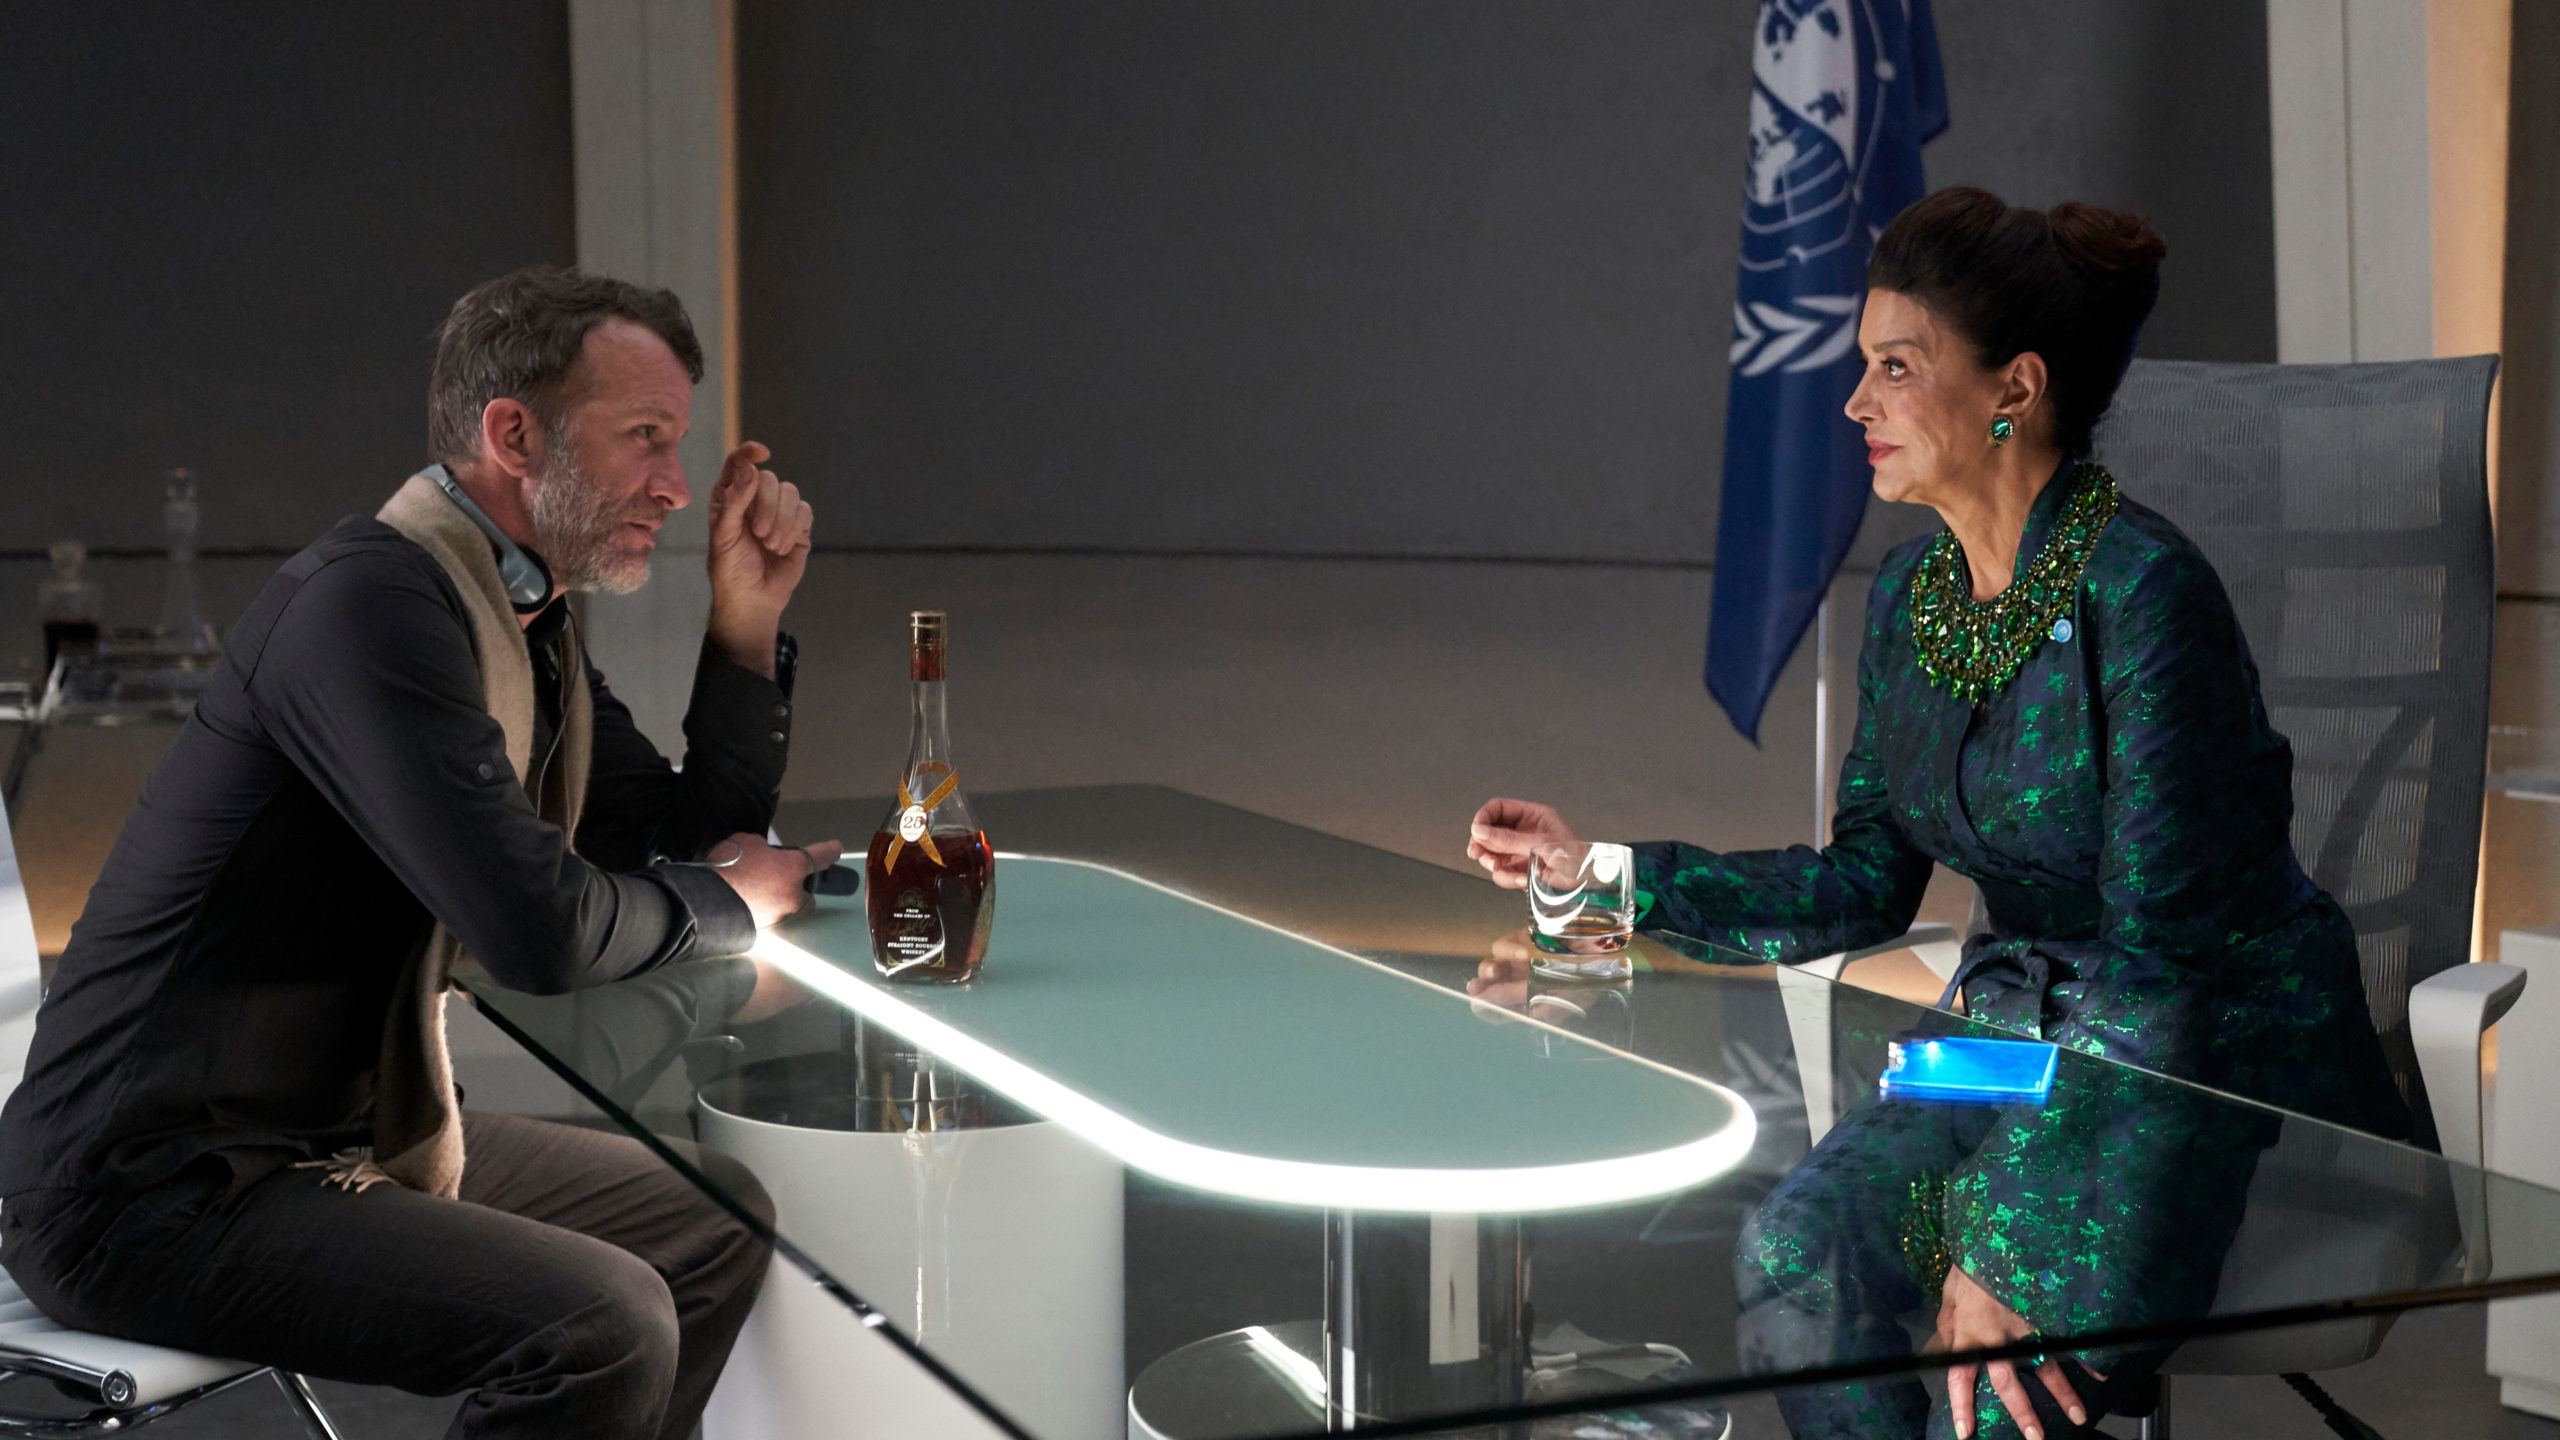 Thomas Jane (left) provides some guidance for Shohreh Aghdashloo while filming a scene, in a series of photos provided exclusively to outlets that attended 2019's The Expanse set visit.